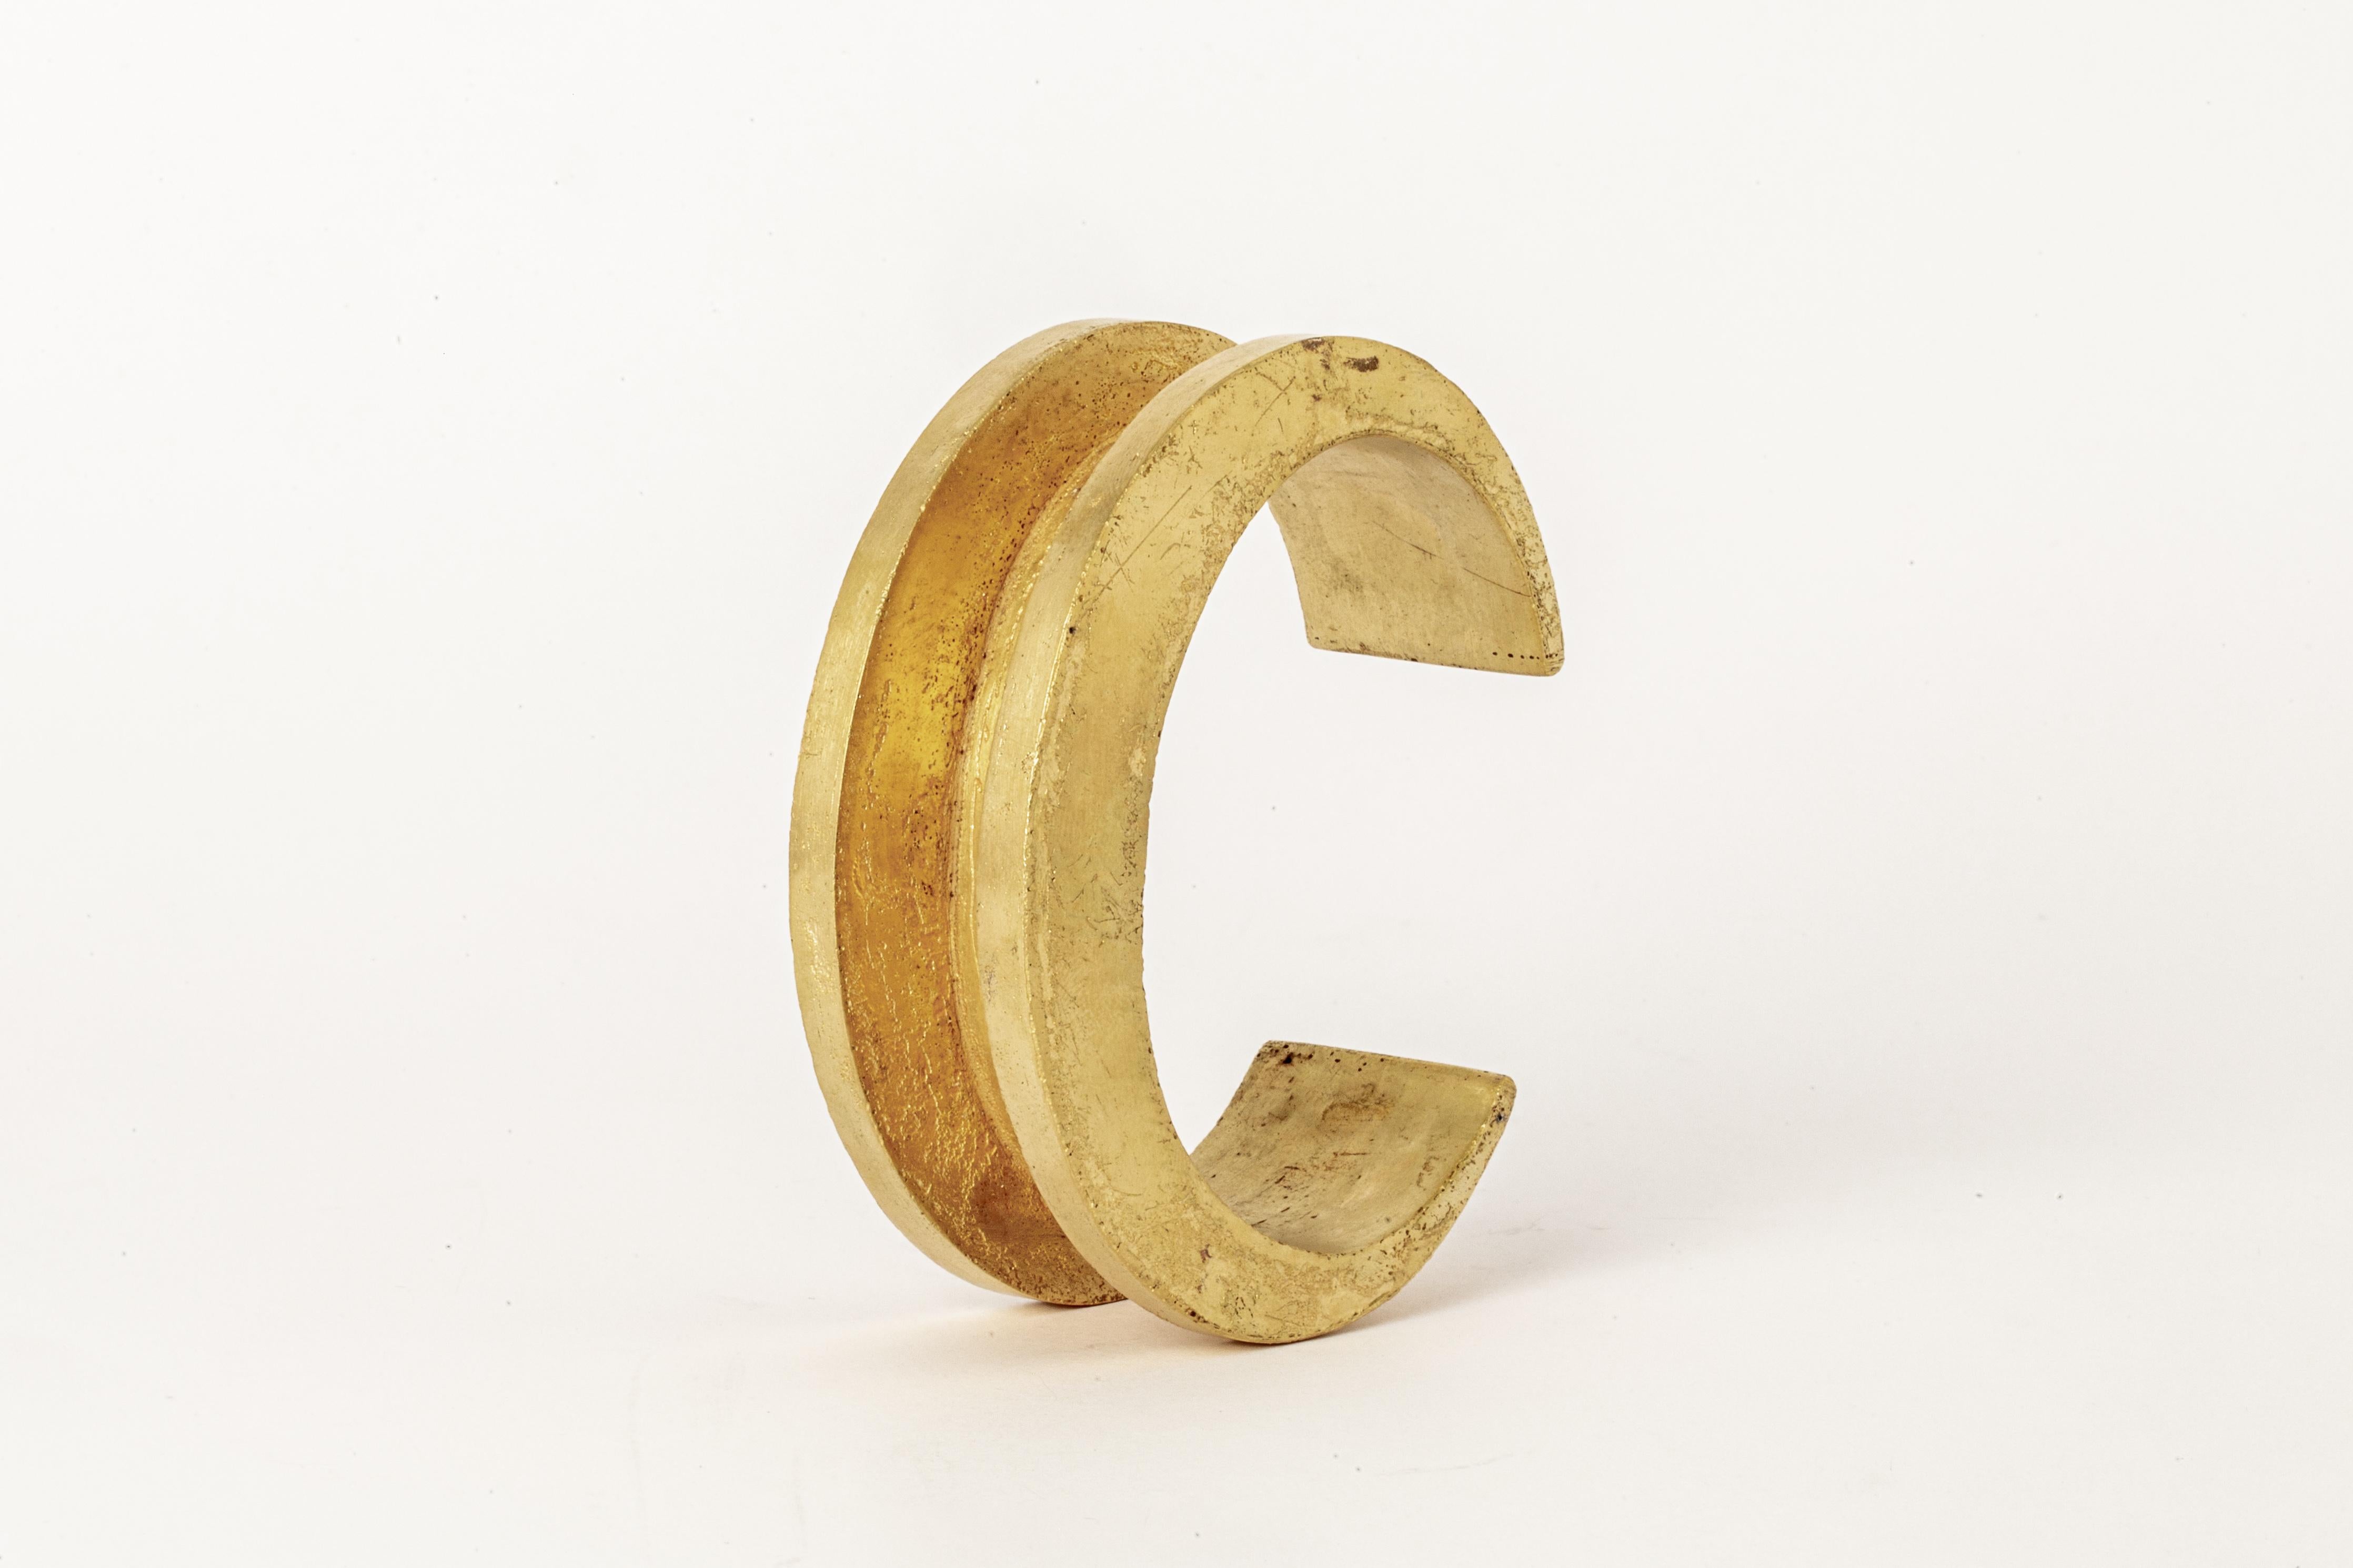 Bracelet in brass. Brass substrate is electroplated with 18k gold and then dipped into acid to create the subtly destroyed surface. This piece is 100% hand fabricated from metal plate; cut into sections and soldered together to make the hollow three